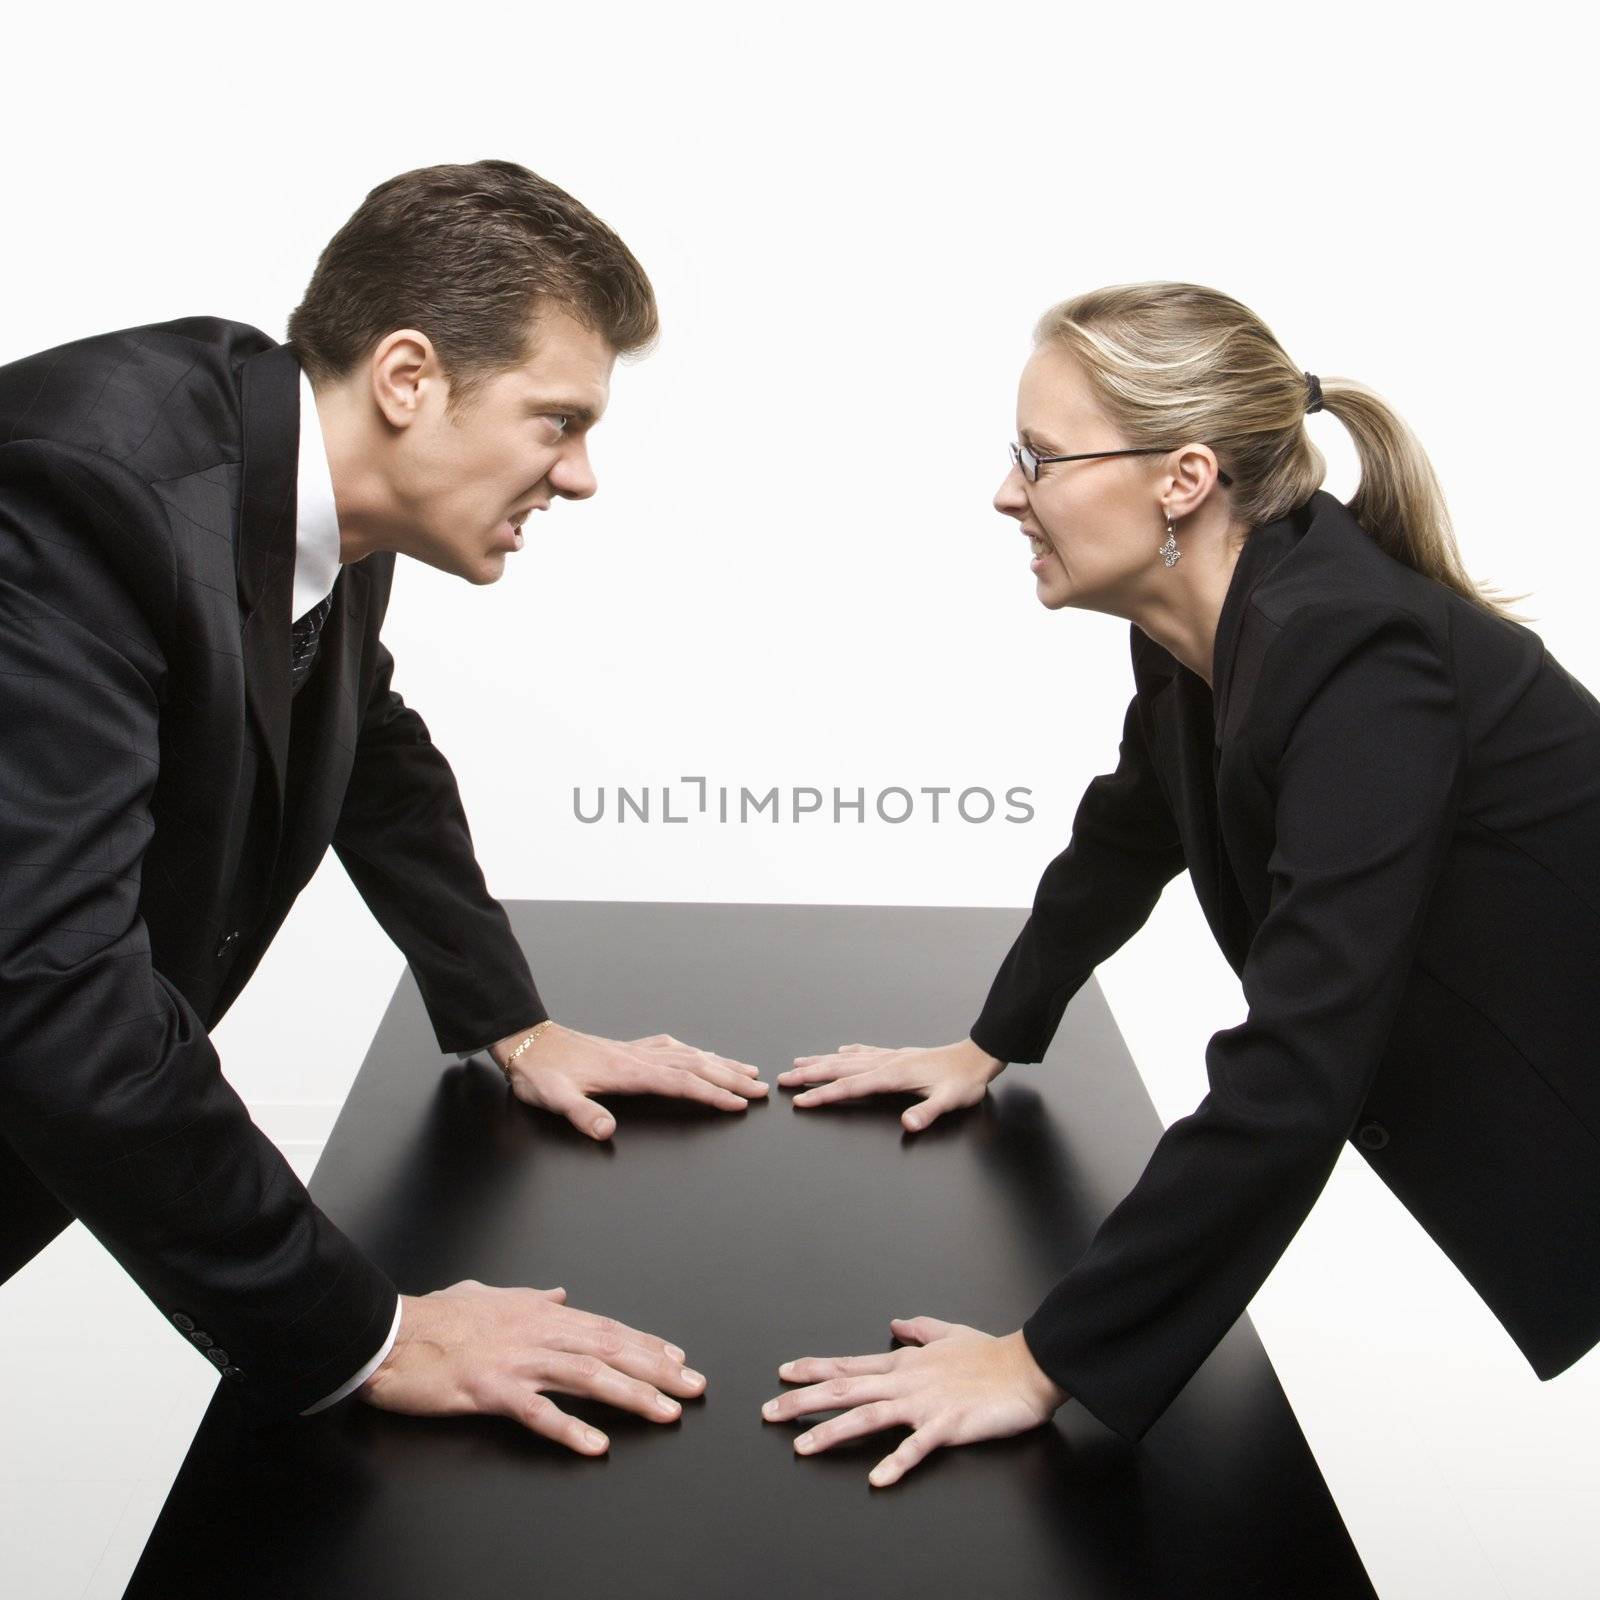 Caucasian mid-adult businessman and woman staring at each other with hostile expressions.